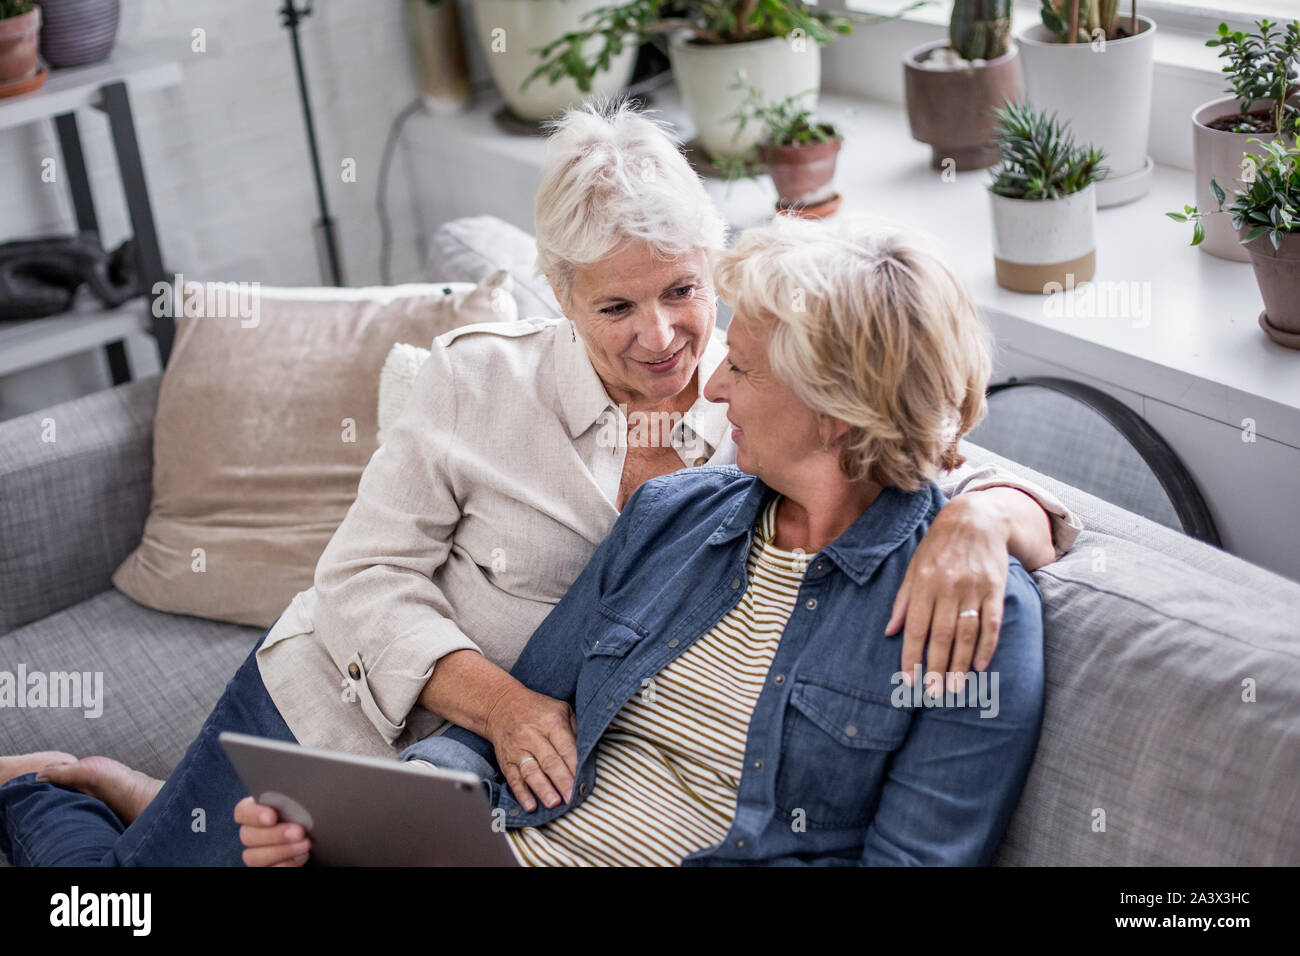 Lesbienne mature couple looking at digital tablet together on sofa Banque D'Images